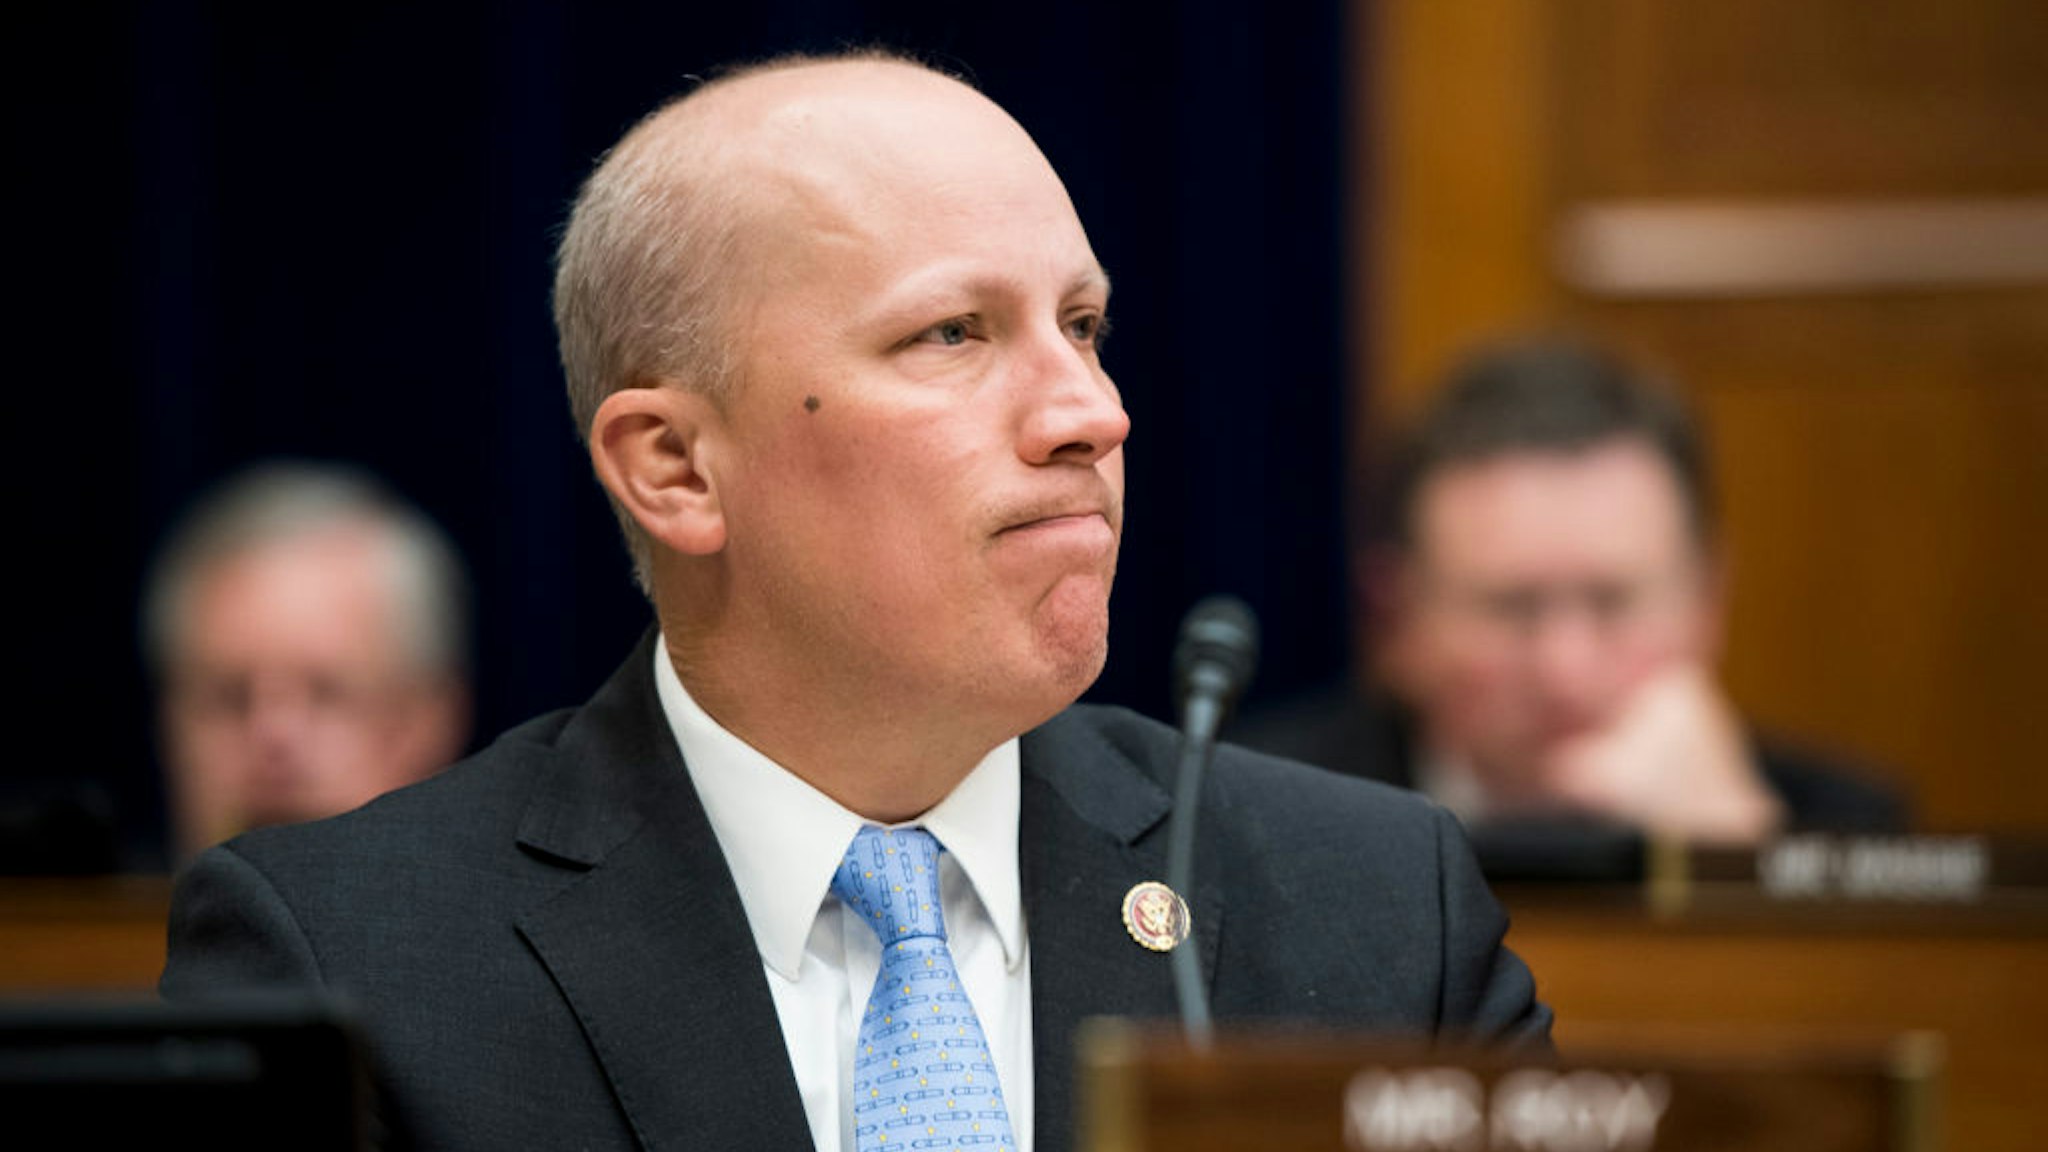 Rep. Chip Roy, R-Texas, left, listens during the House Oversight and Reform Committee markup of a resolution authorizing issuance of subpoenas related to security clearances and the 2020 Census on Tuesday, April 2m 2019.